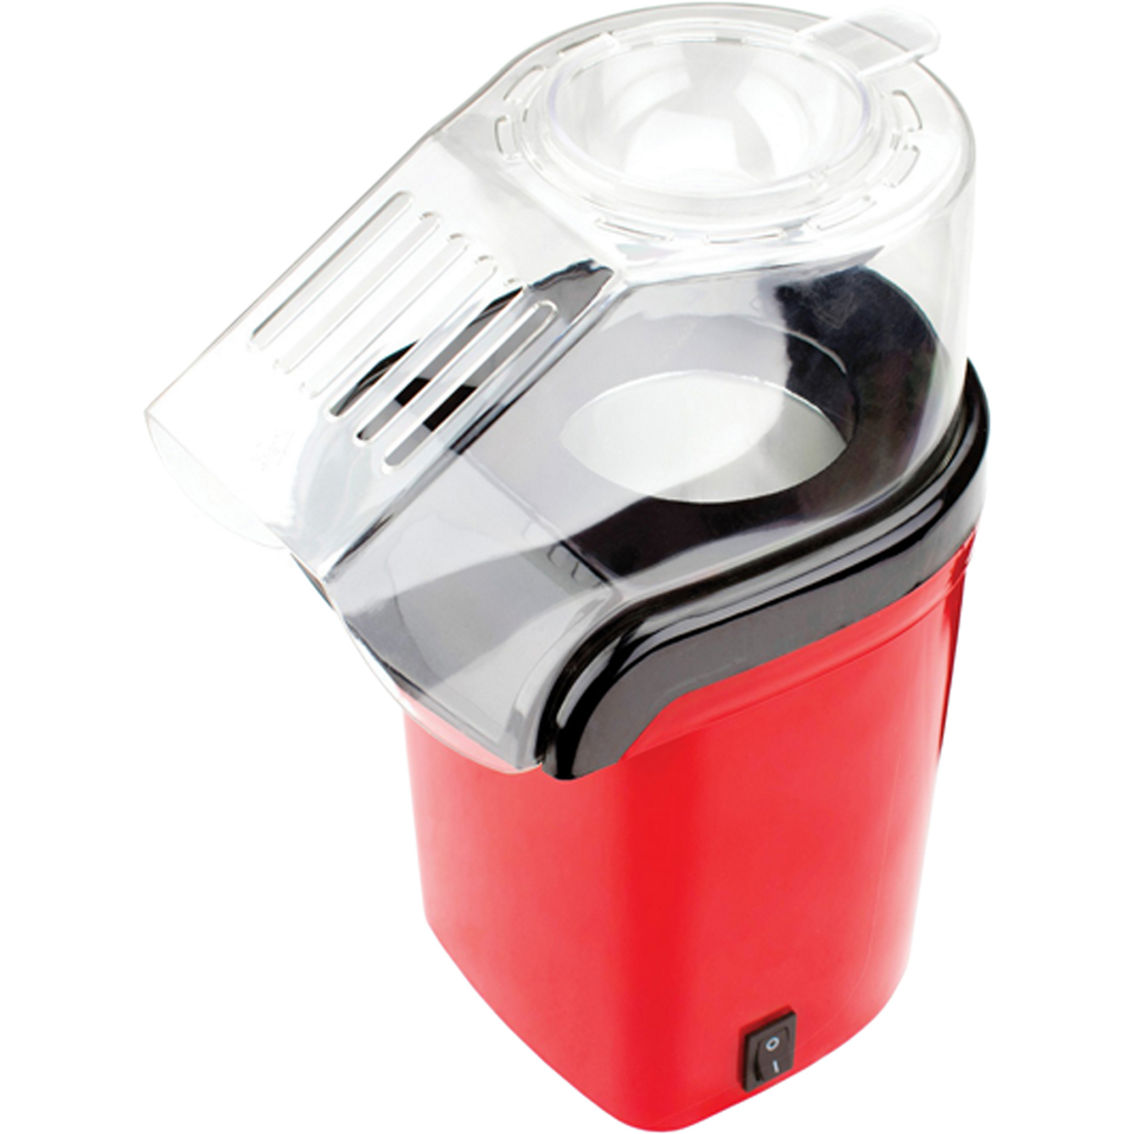 Brentwood 8 Cup Red Hot Air Popcorn Maker - Image 3 of 6